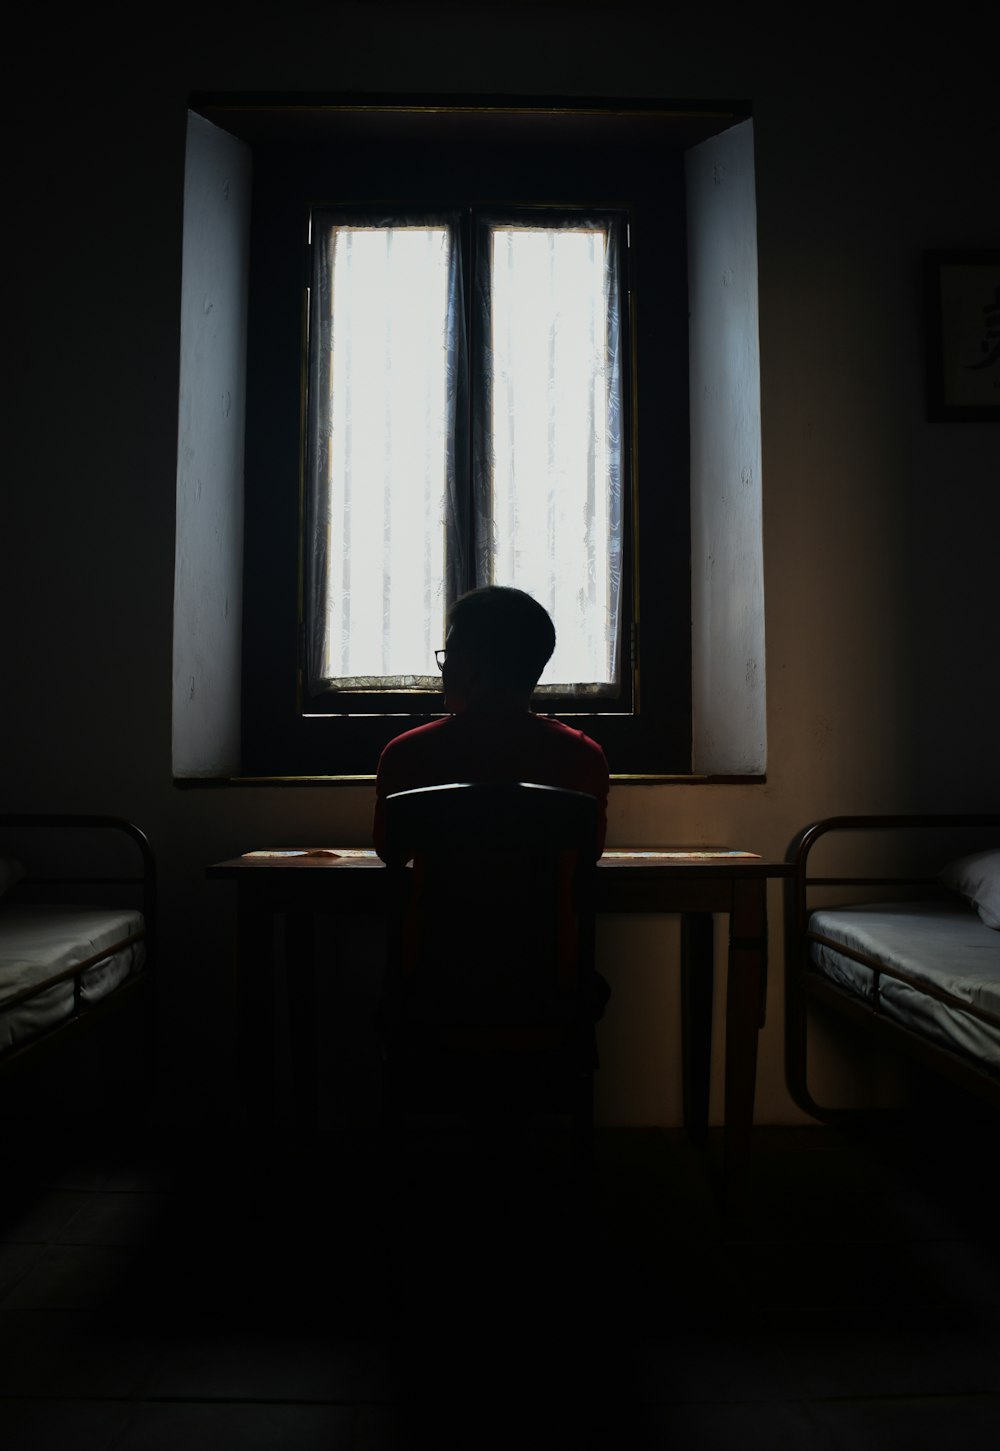 silhouette of person in front of window